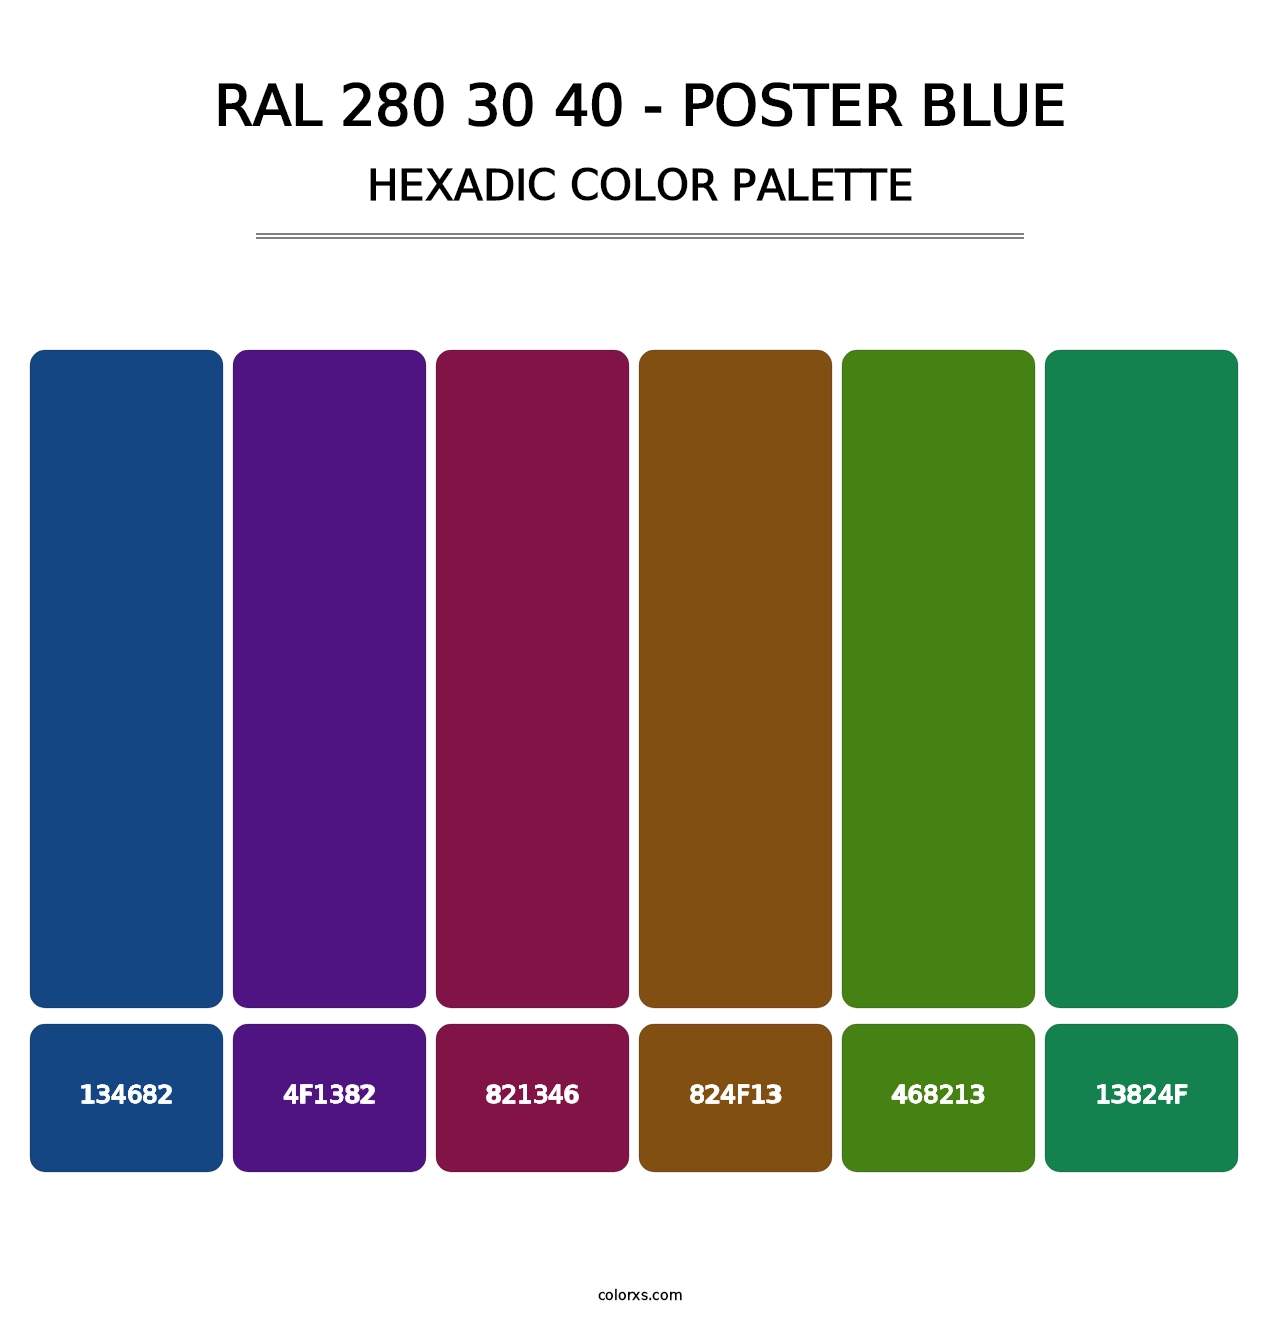 RAL 280 30 40 - Poster Blue - Hexadic Color Palette